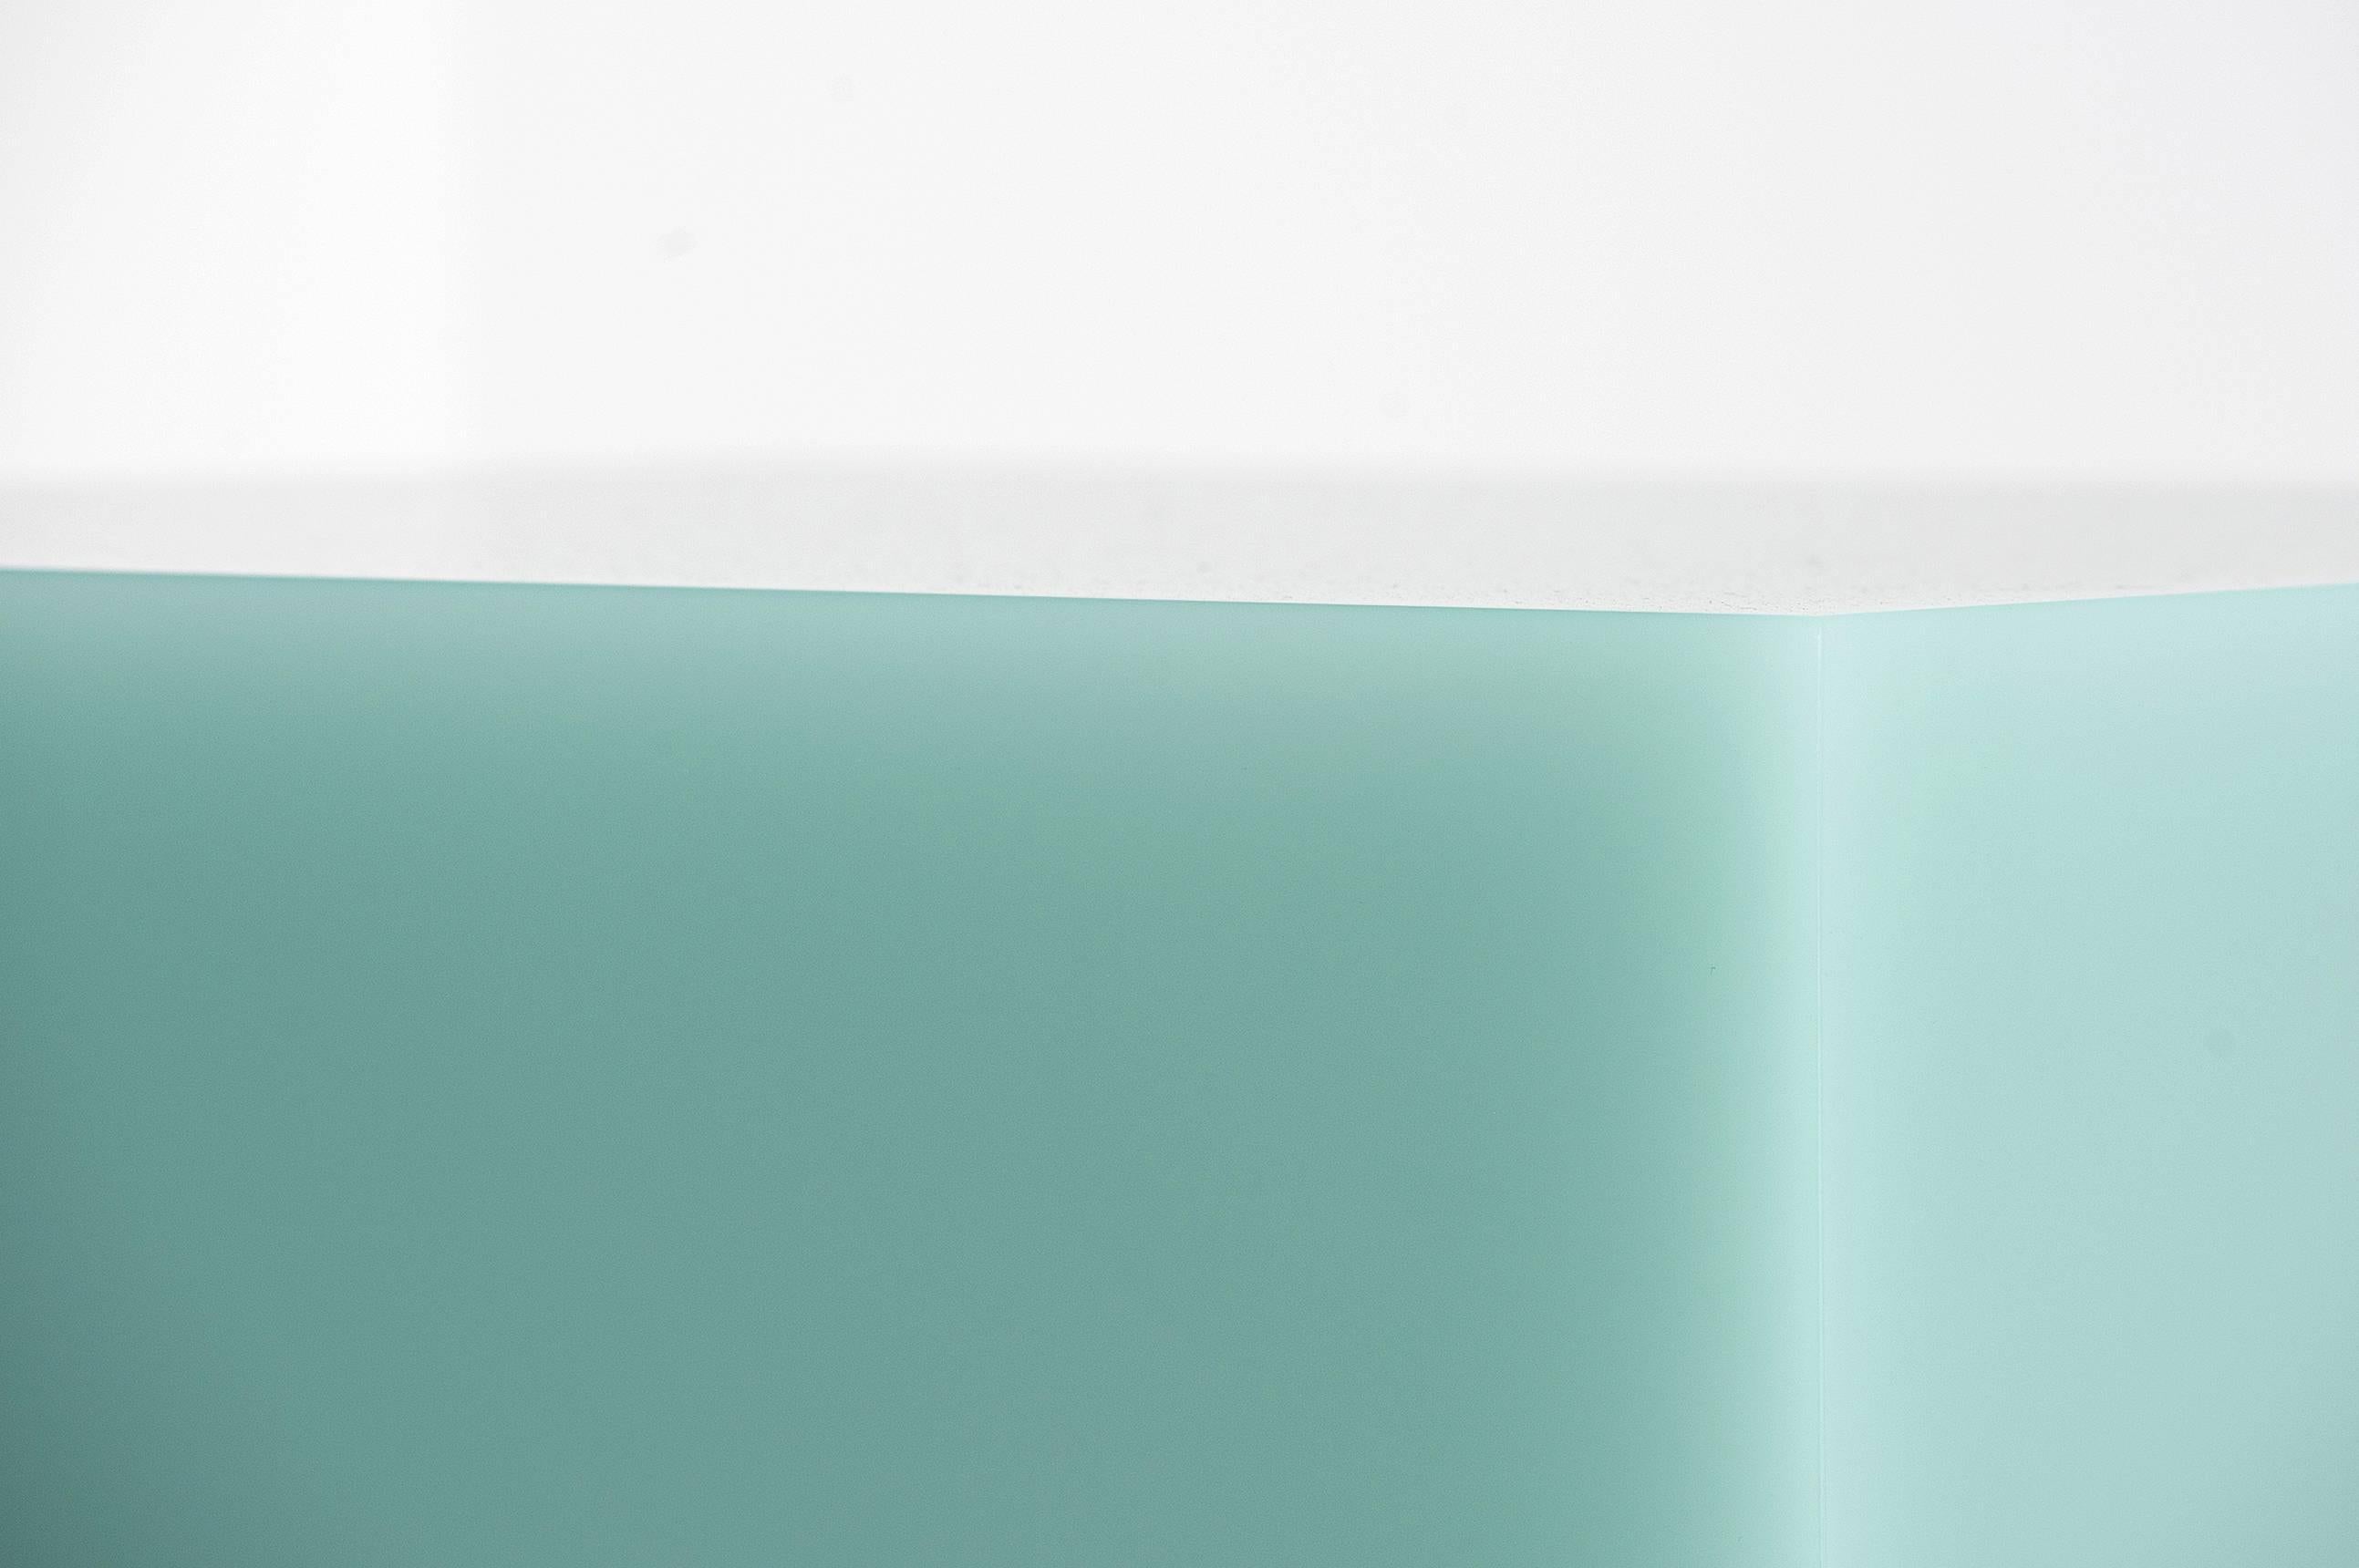 Sabine Marcelis 

Freestanding table in mint
From the series “Candy Cubes”
Manufactured by Sabine Marcelis
Produced for Side Gallery
Rotterdam, The Netherlands, 2017
High polished single cast resin.

Measurements
50 cm x 50 cm x 50h